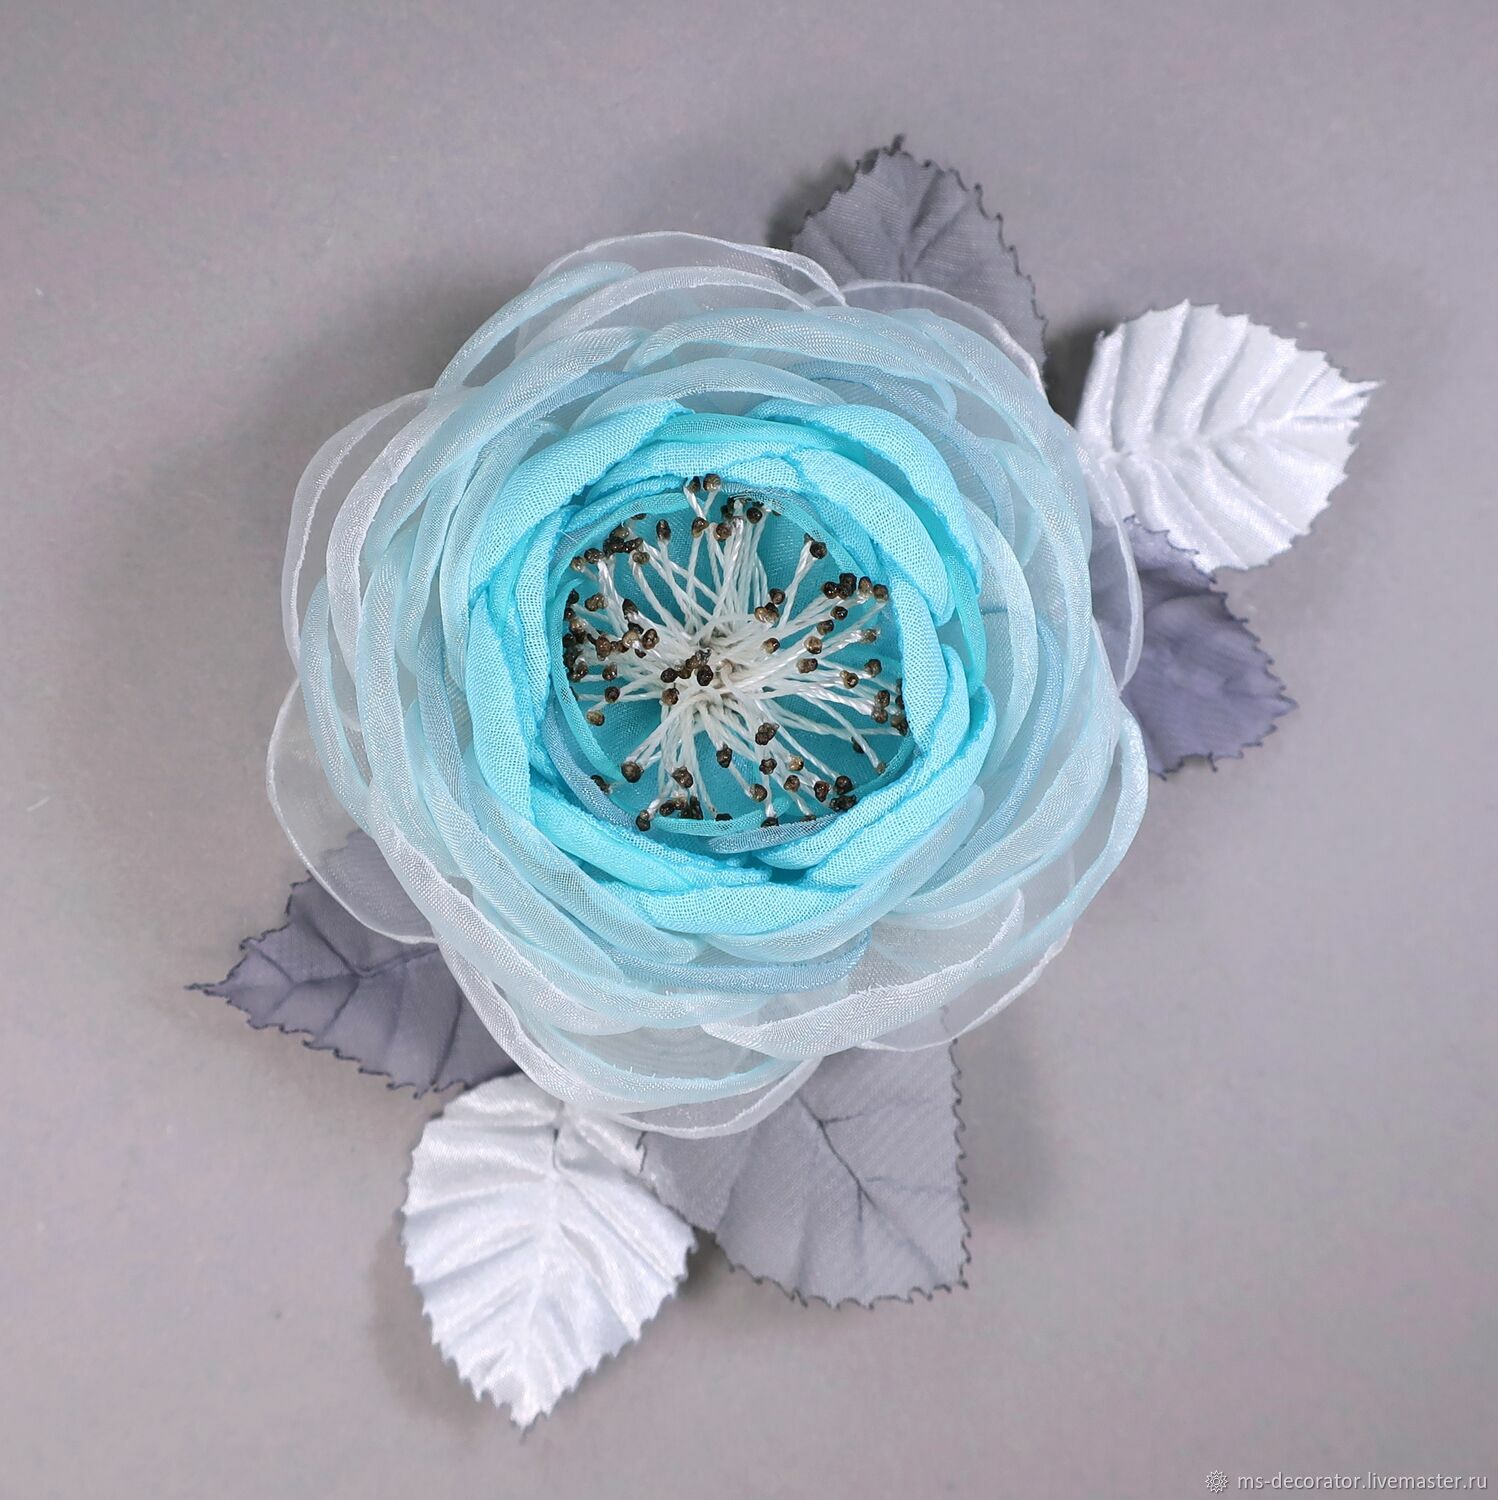 Windy Rose Brooch - Handmade flower made of fabric, Brooches, St. Petersburg,  Фото №1